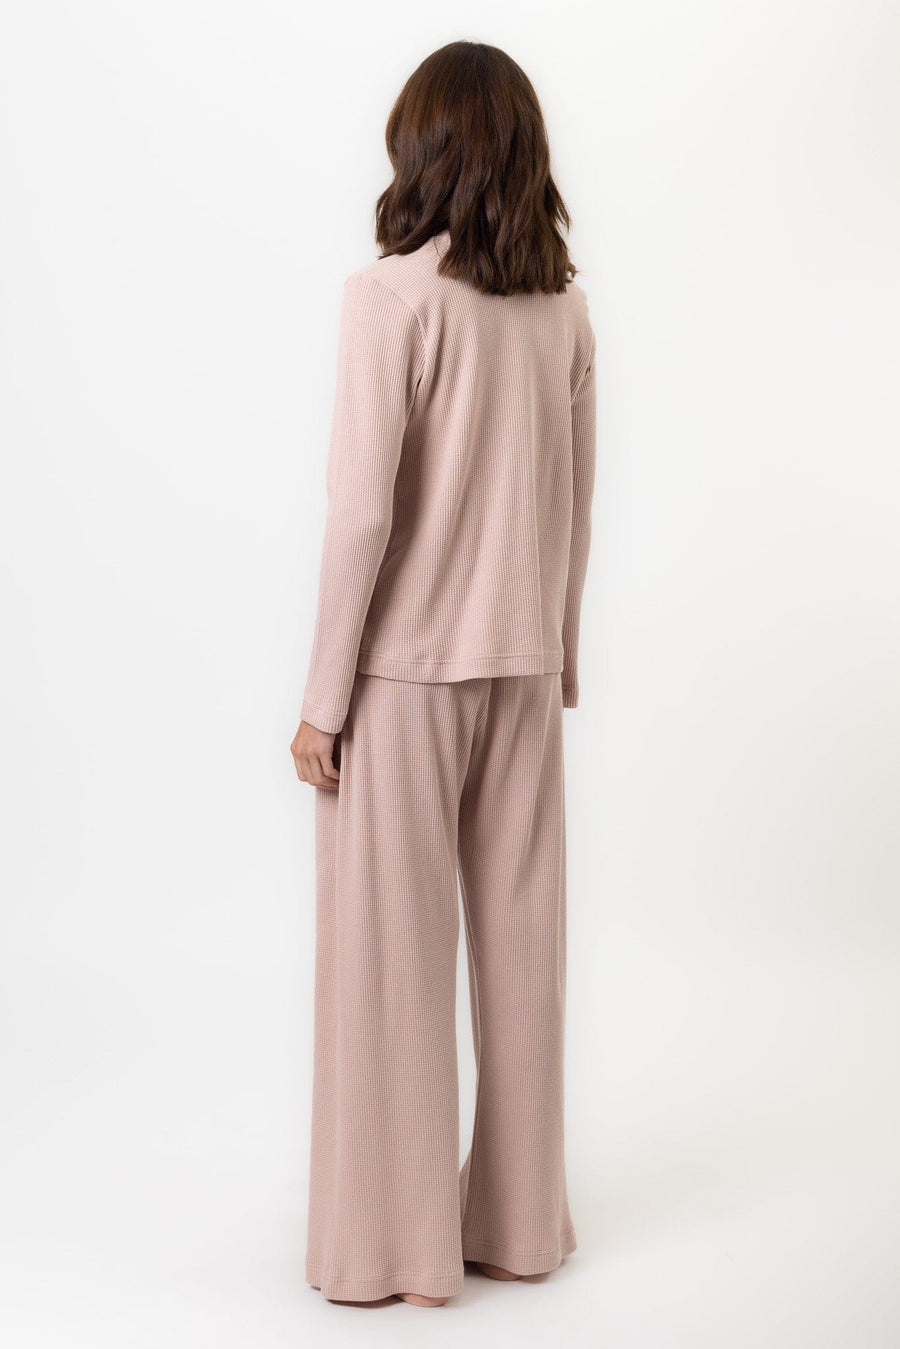 Blithe Top | Dusty Pink Blithe Top Tops Pajamas Australia Online | Reverie the Label  TOPS Blithe Top